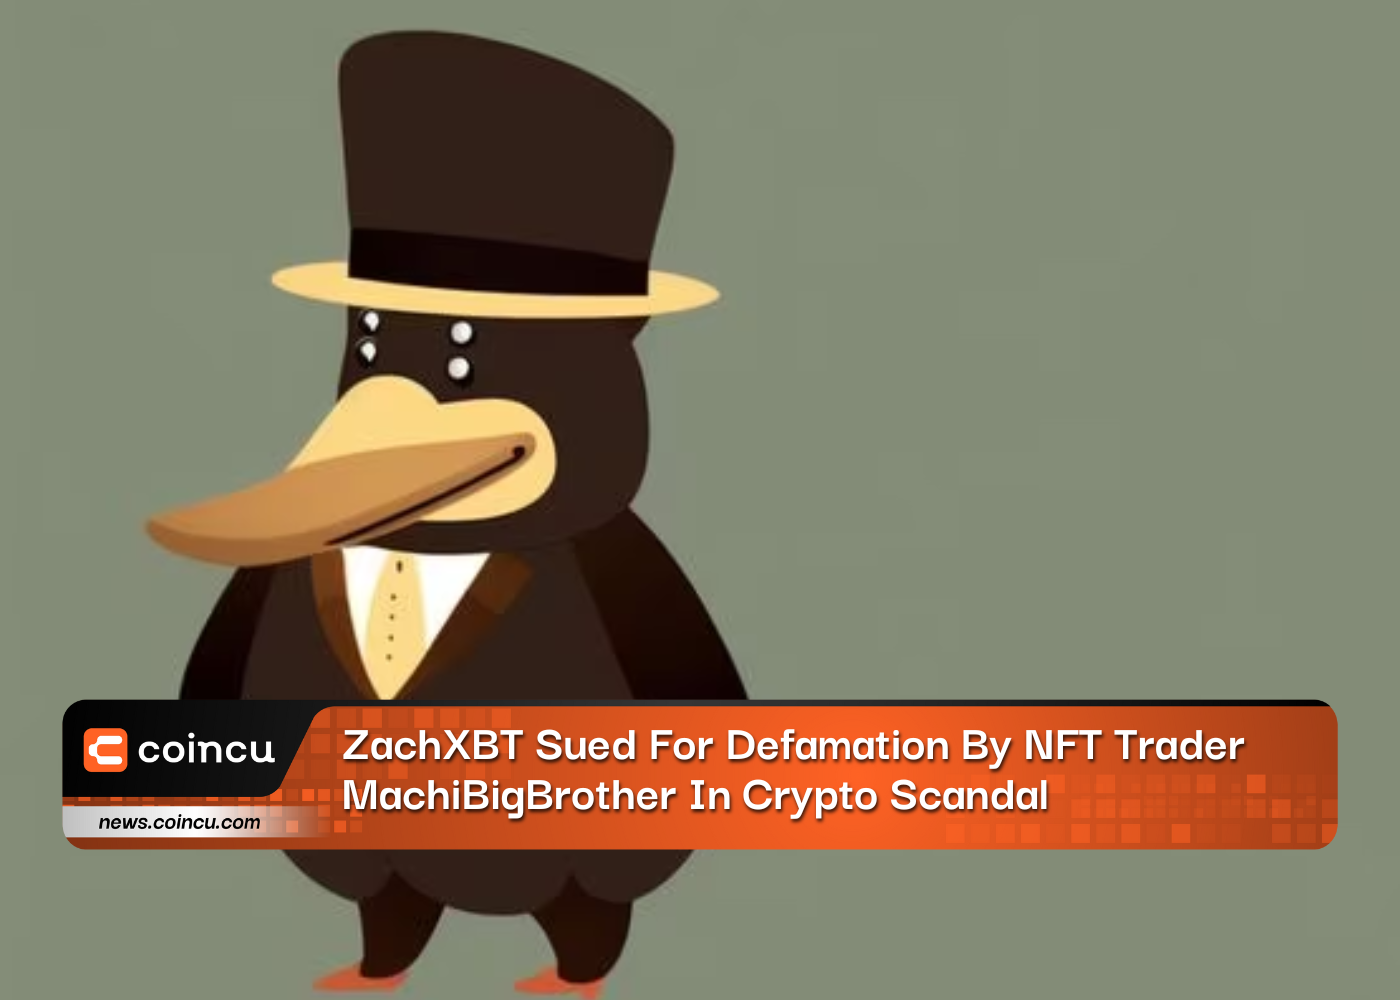 ZachXBT Sued For Defamation By NFT Trader MachiBigBrother In Crypto Scandal